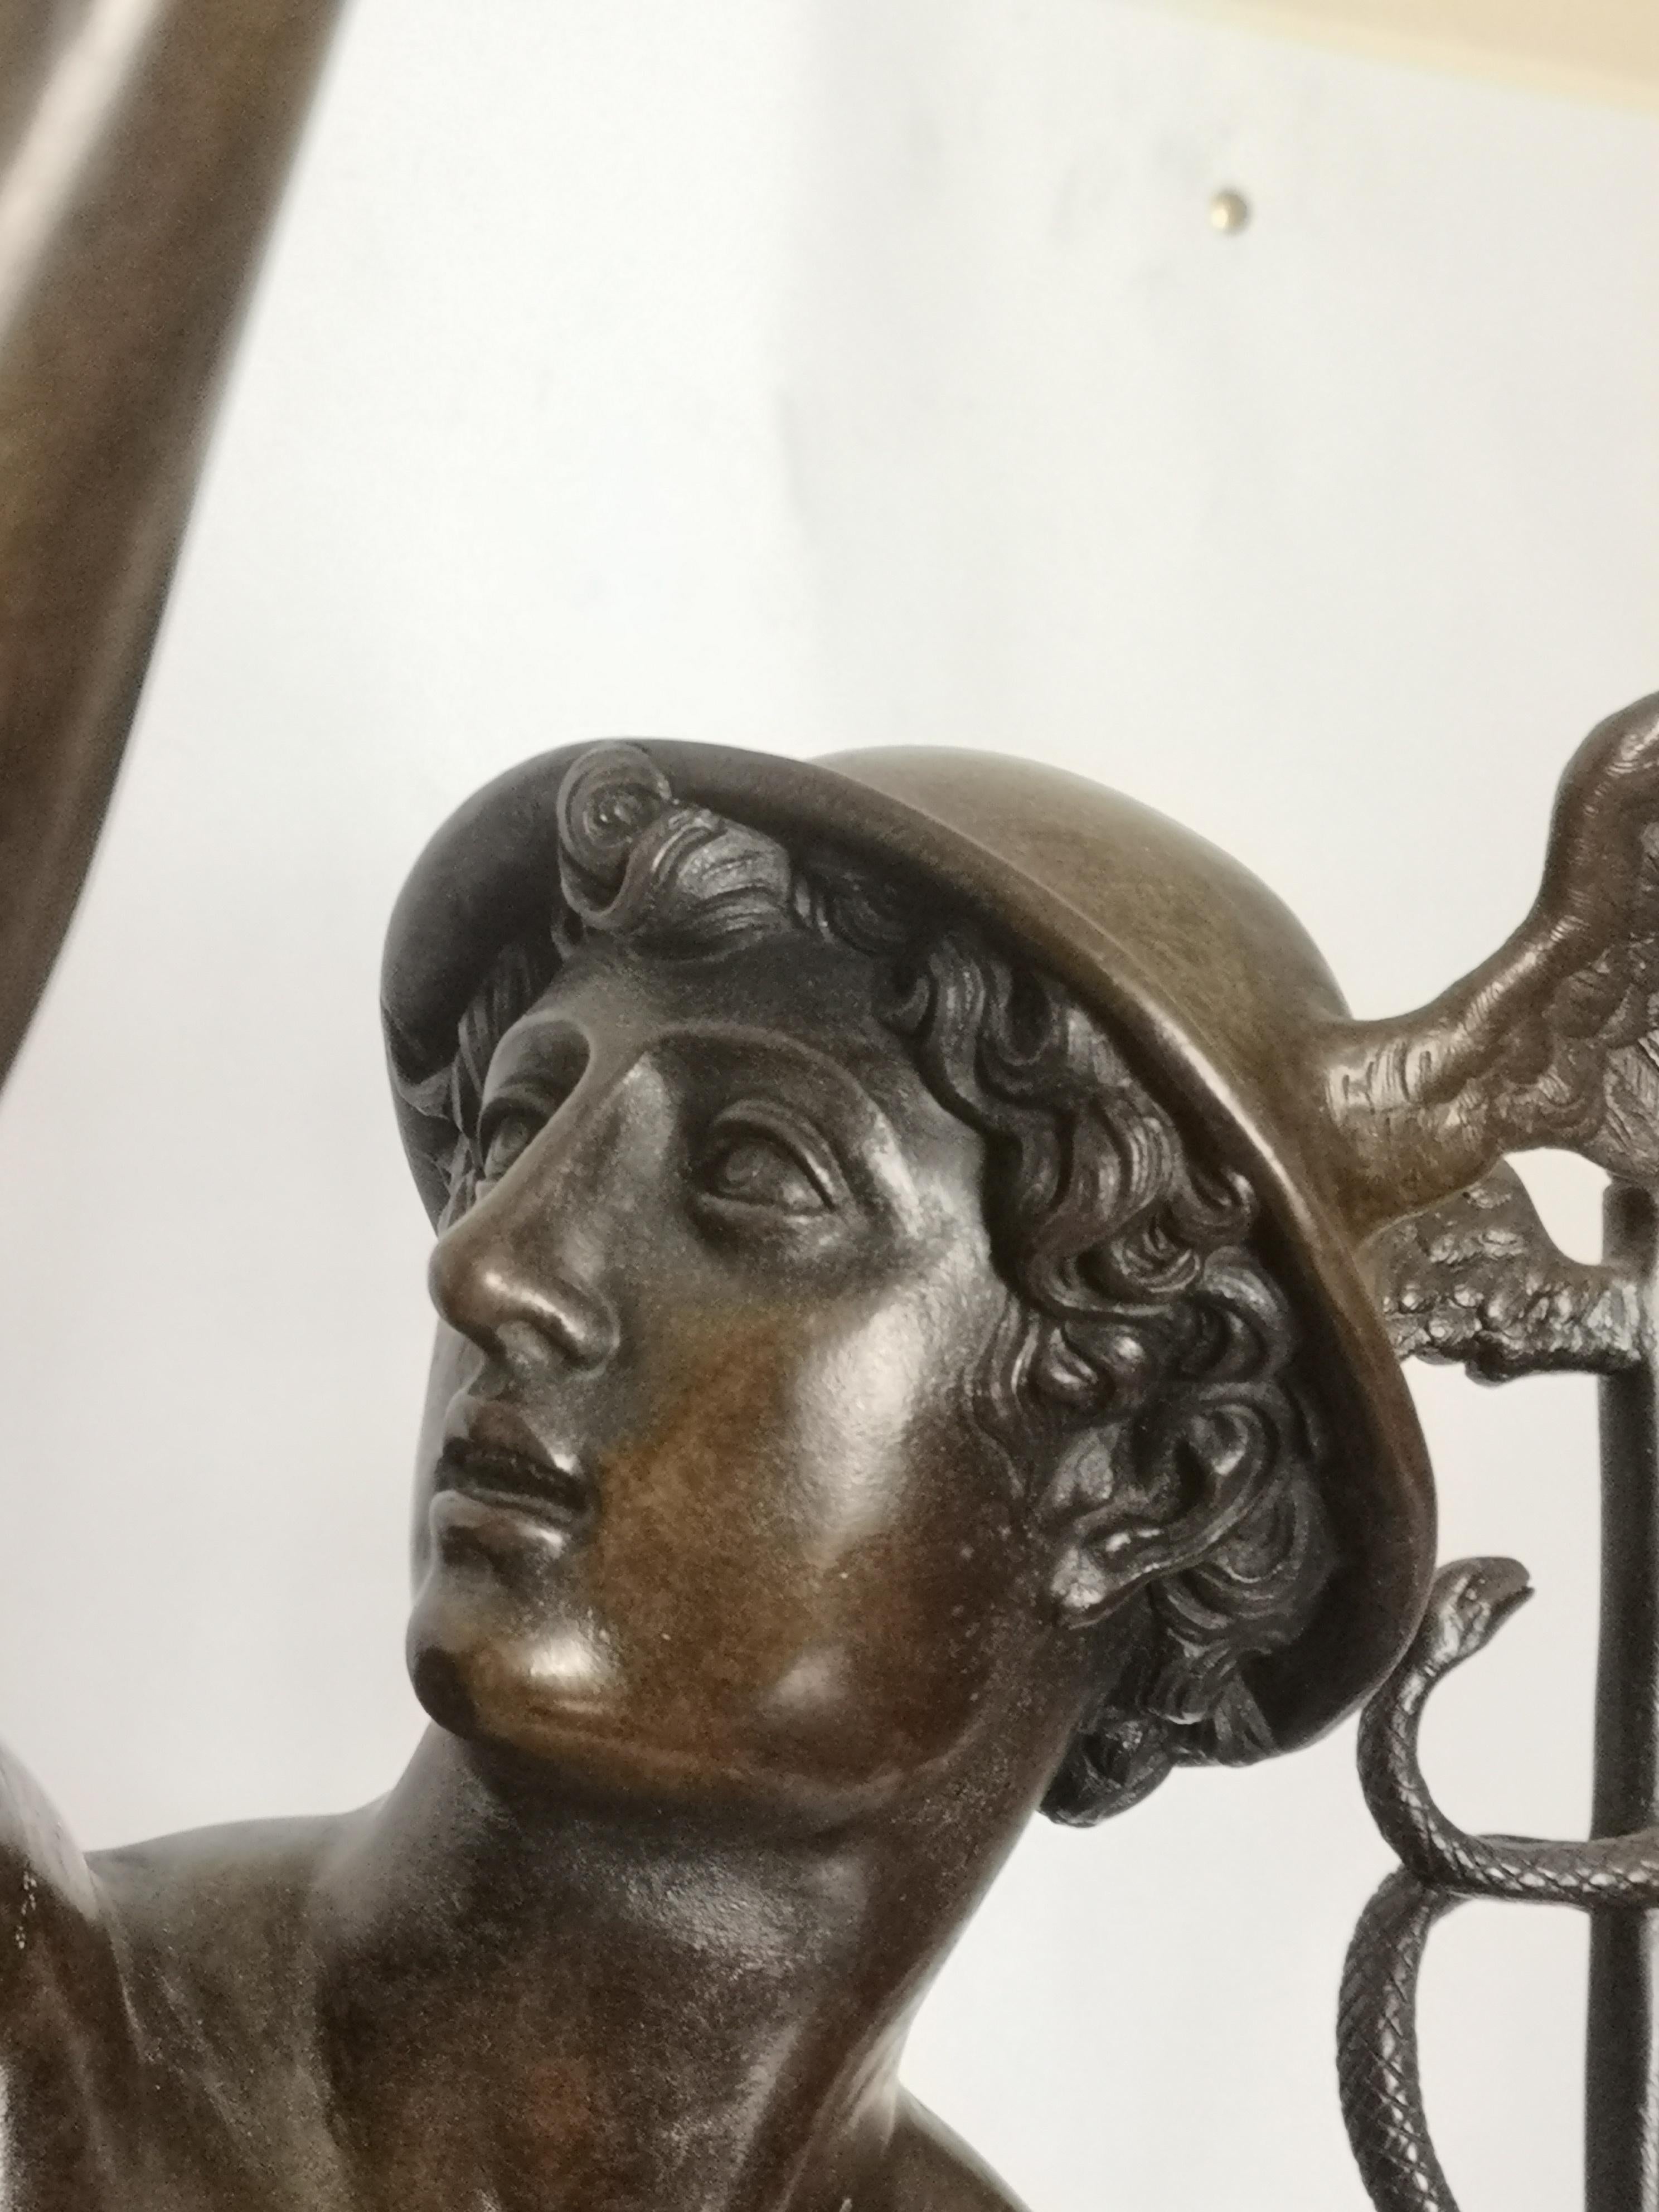 This large scale 19th century French bronze sculpture, modelled as the Greek God Mercury (Hermes in Roman), holding his sceptre with two entertwined snakes, flying above Boreas, the god of wind, blowing wind under his feet.
After Giambologna